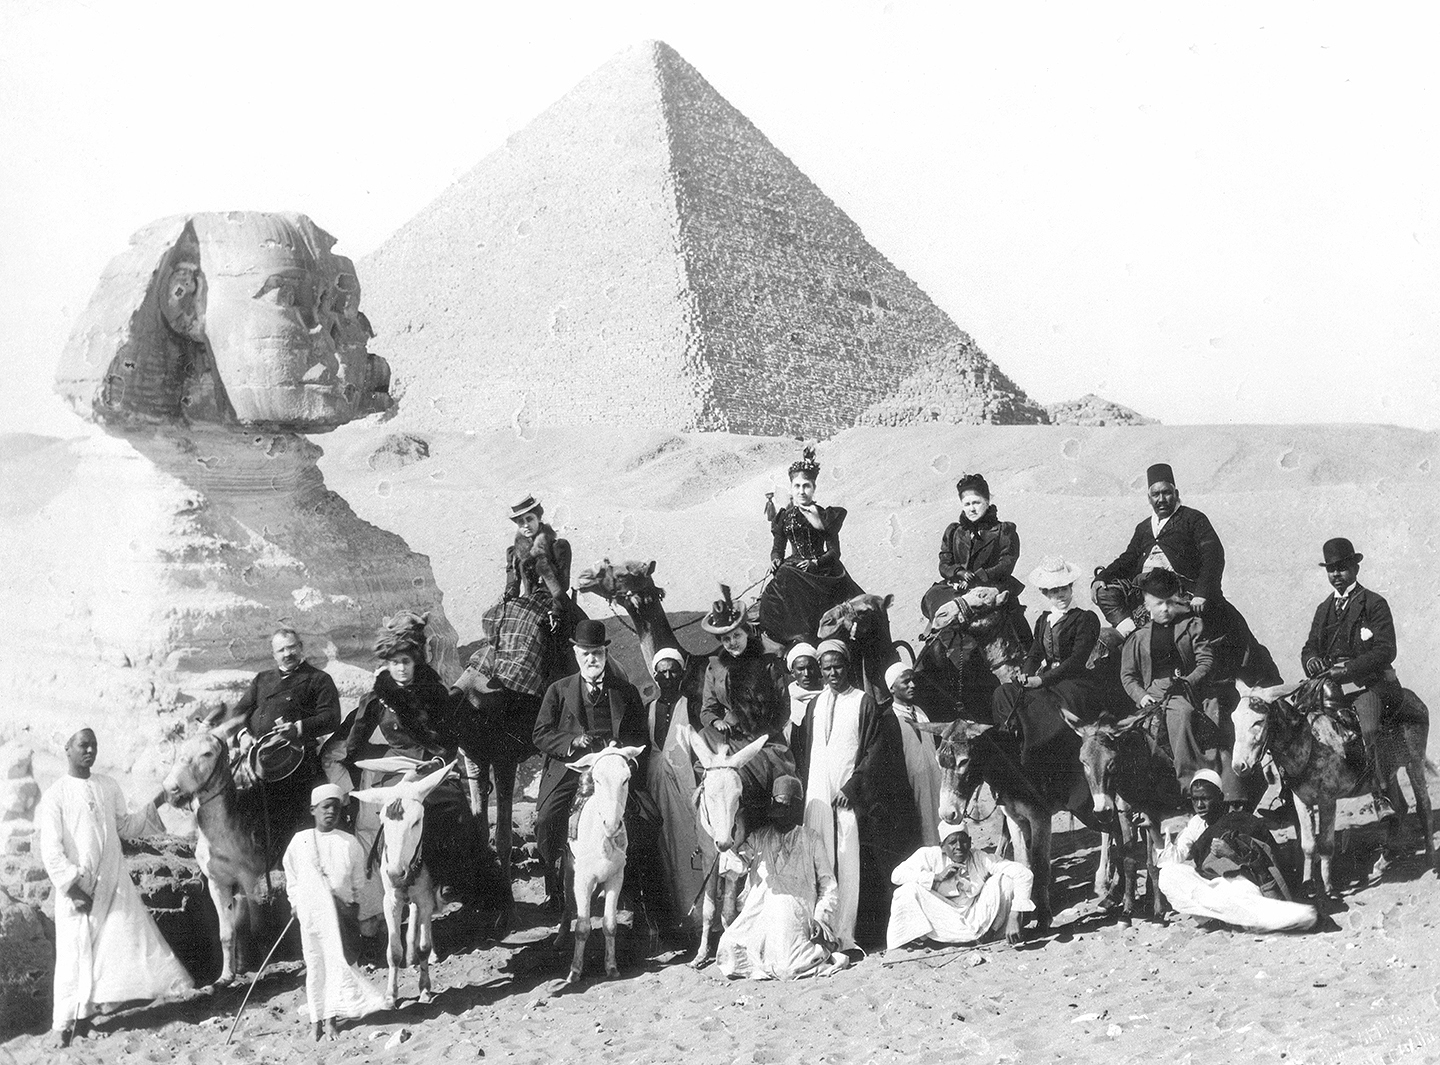 Phoebe Apperson Hearst poses at the pyramids in Giza